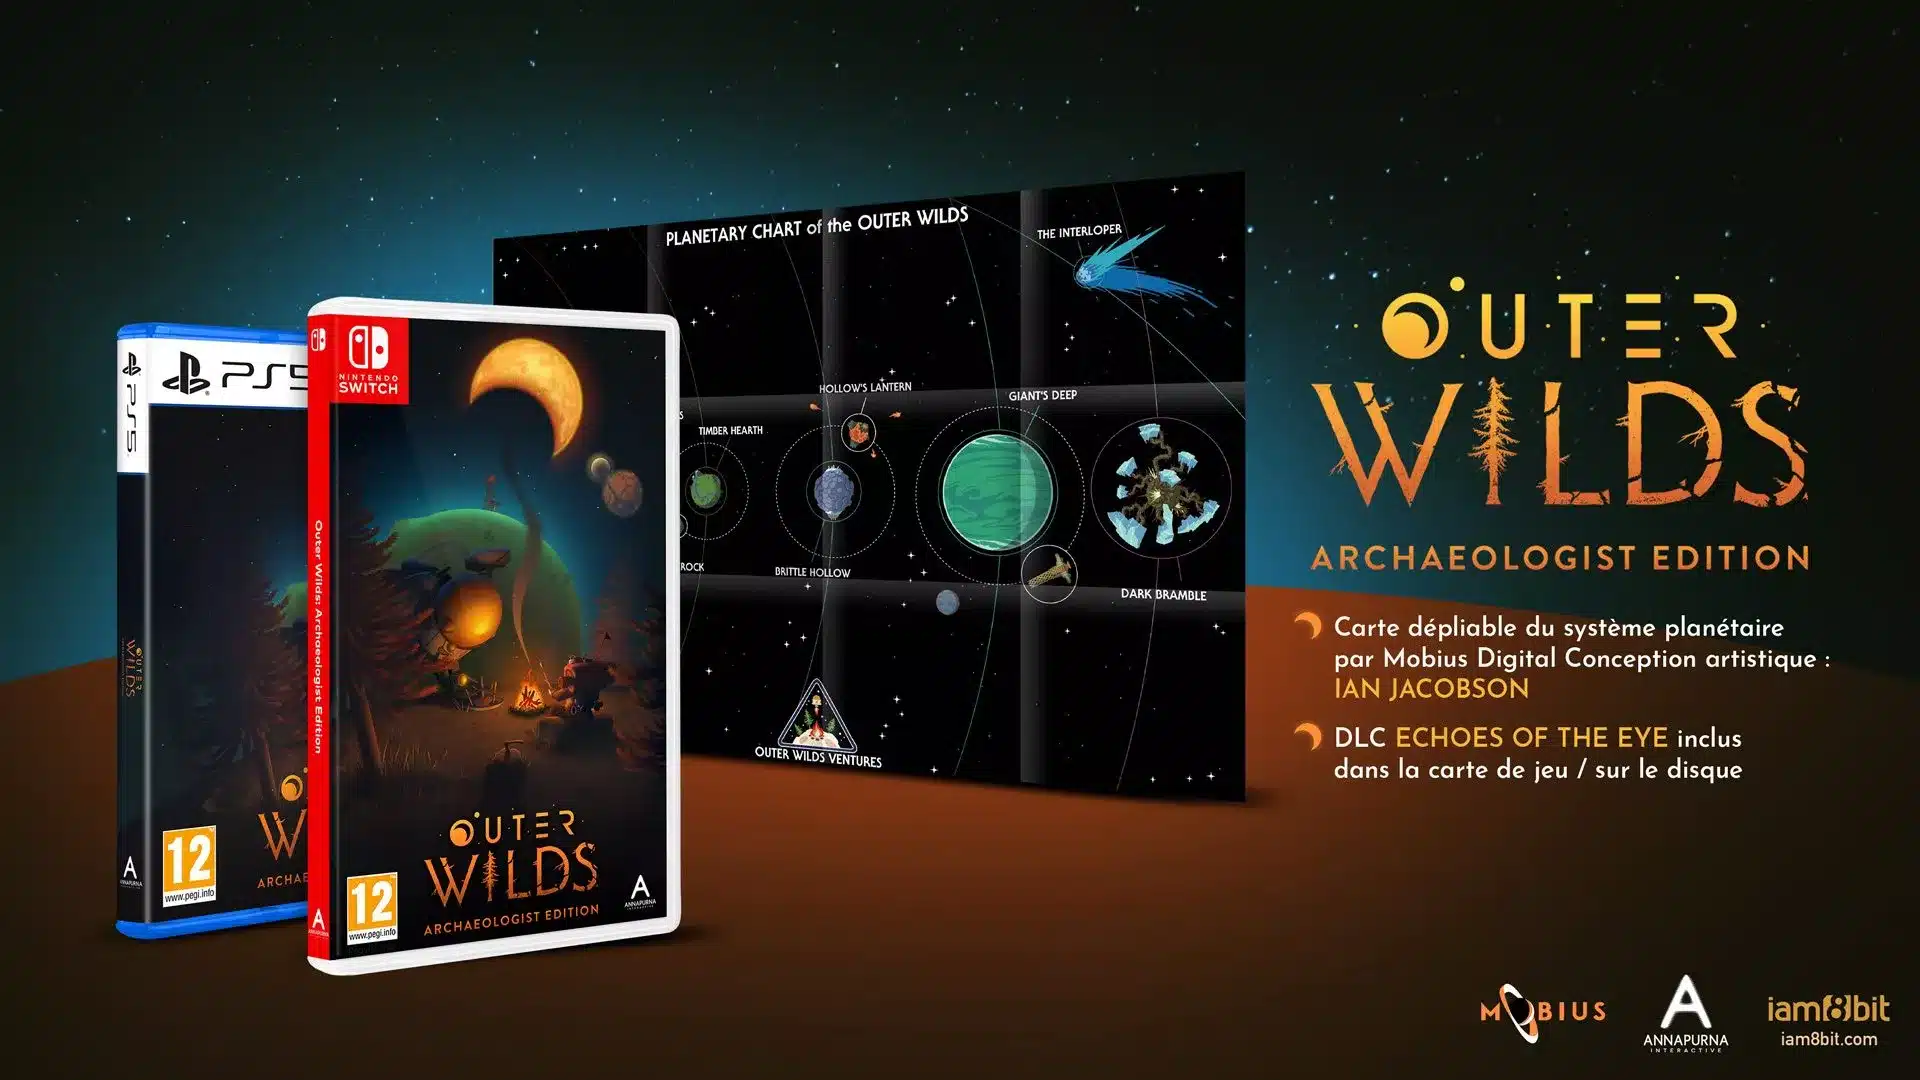 Outer wilds archaeologist edition 1